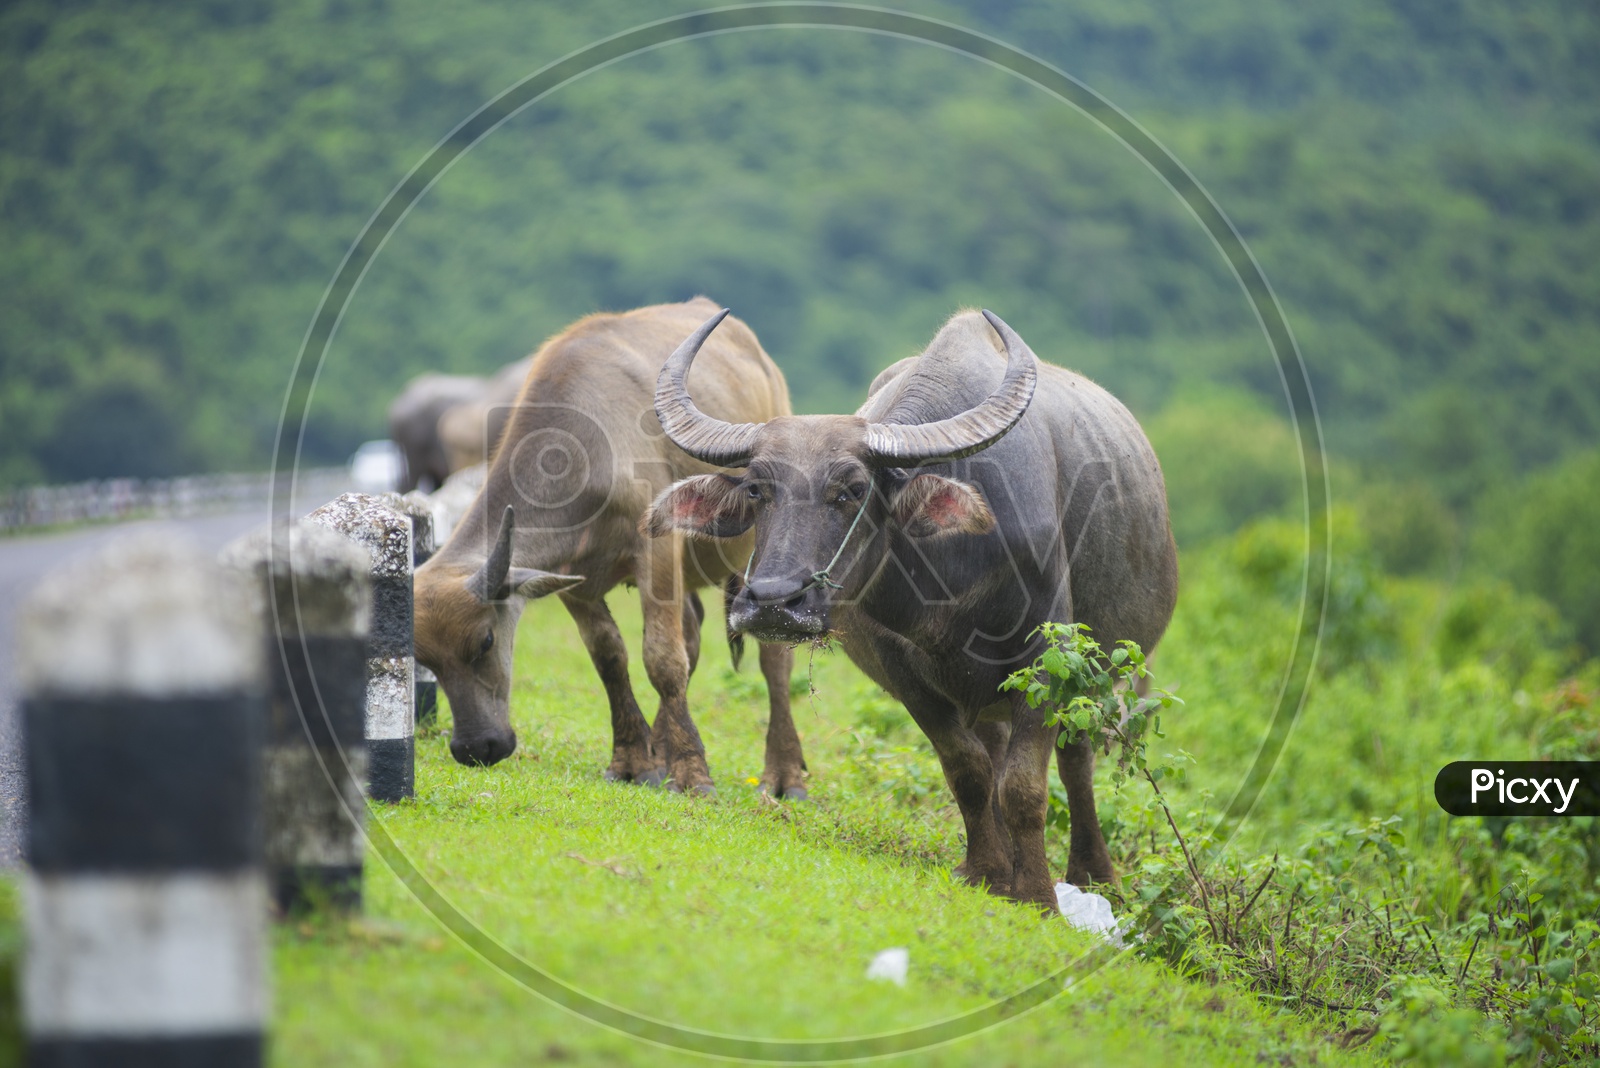 Group of buffalo in Thailand nature field